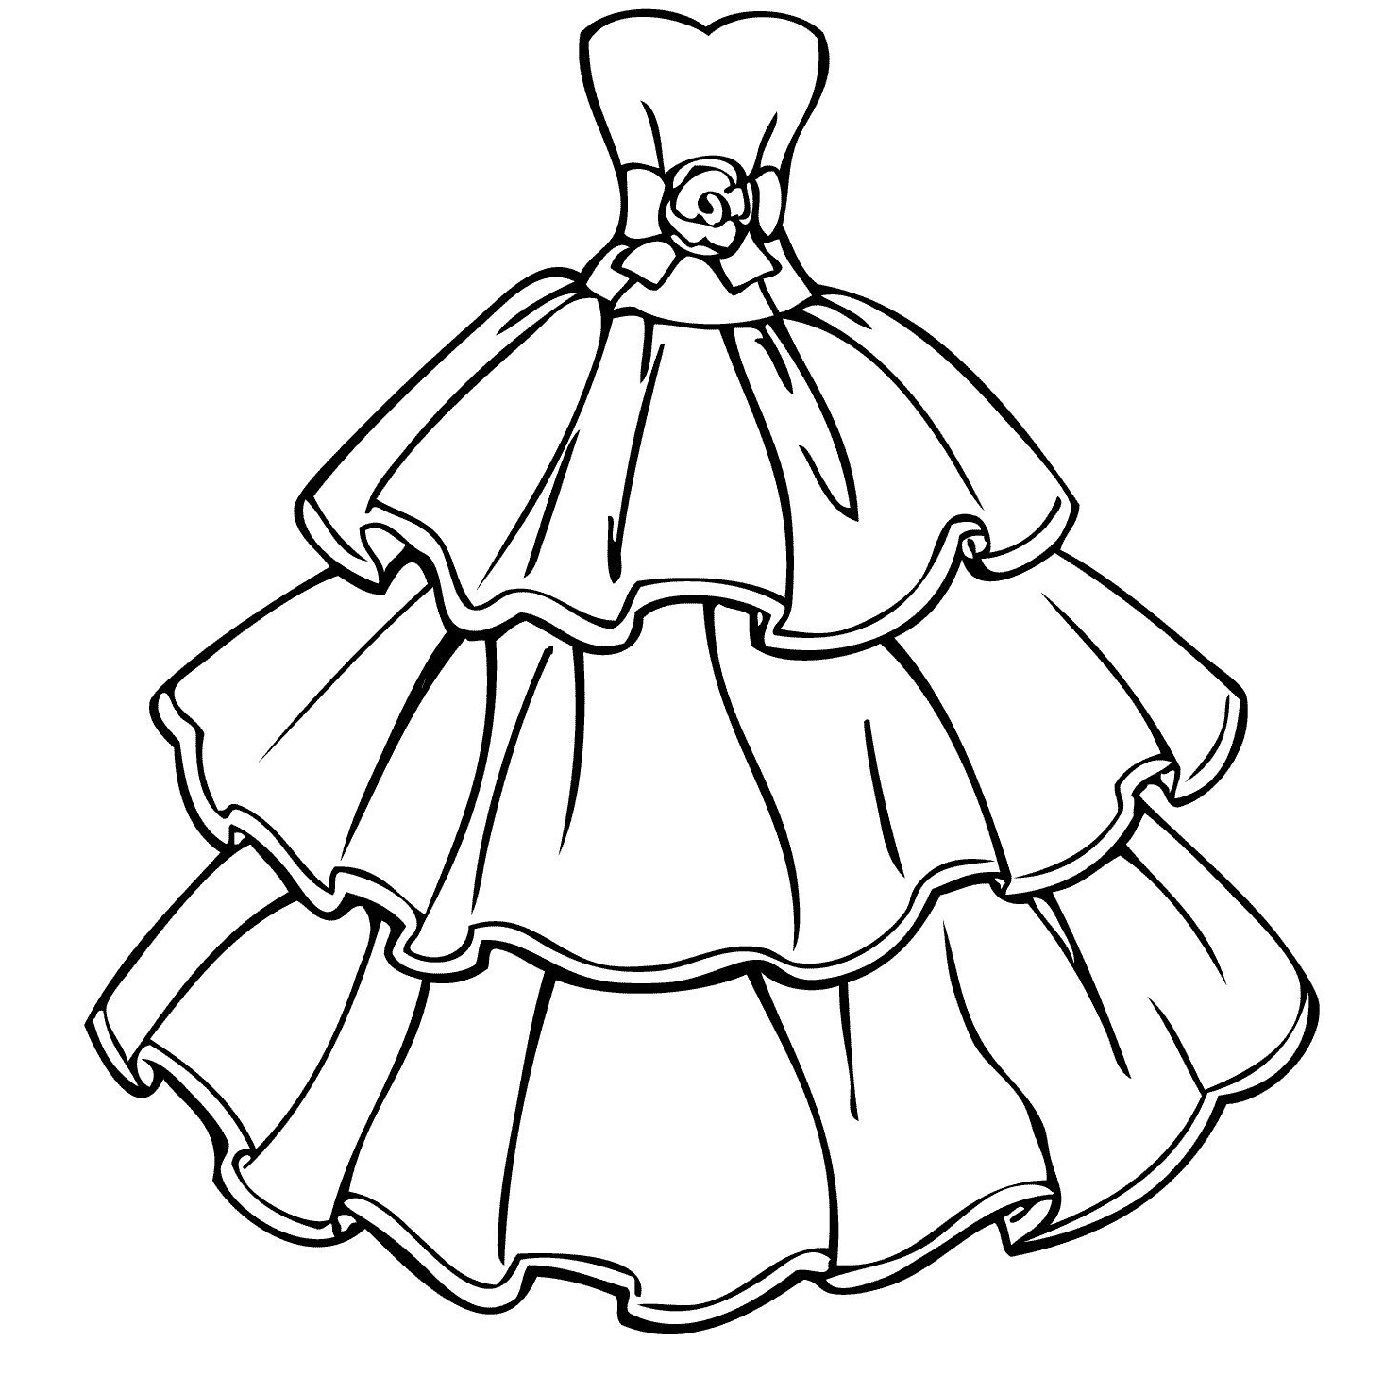 Wedding Dress Coloring Pages   Coloring Pages For Girls, Barbie ...